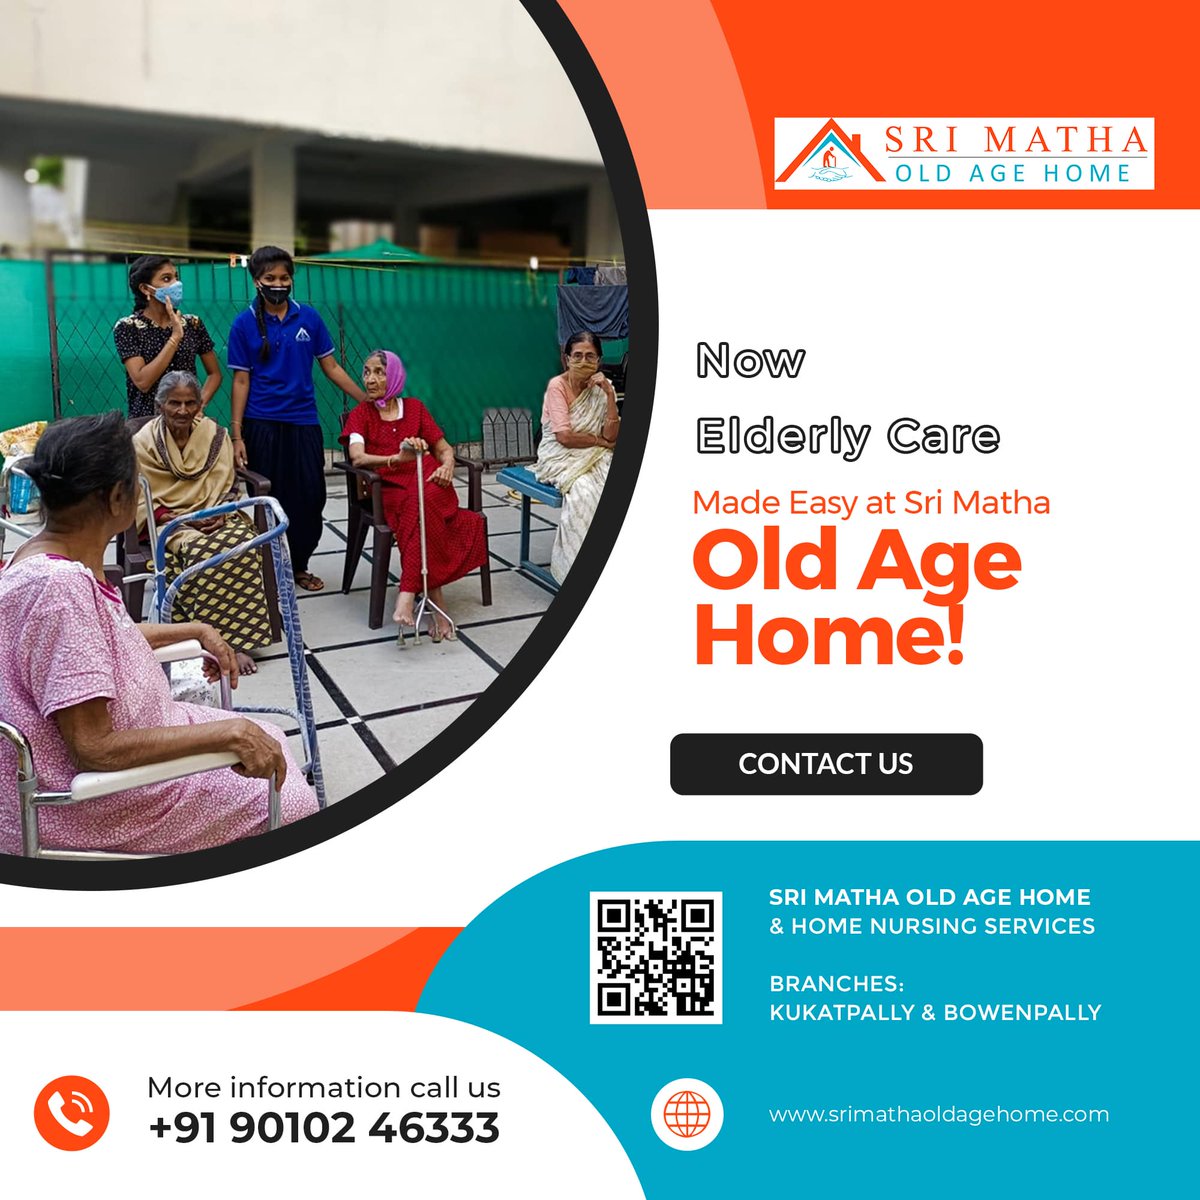 Now Elderly Care Made Easy at Sri Matha Old Age Home! Branches in Kukatpally and Bowenpally.
#homenursing #homenursingcare #oldagehome #physiotherapy #homecareservices #CaretakerGovernmenter #caregiver #retirementhome #nursinghome #postsurgery